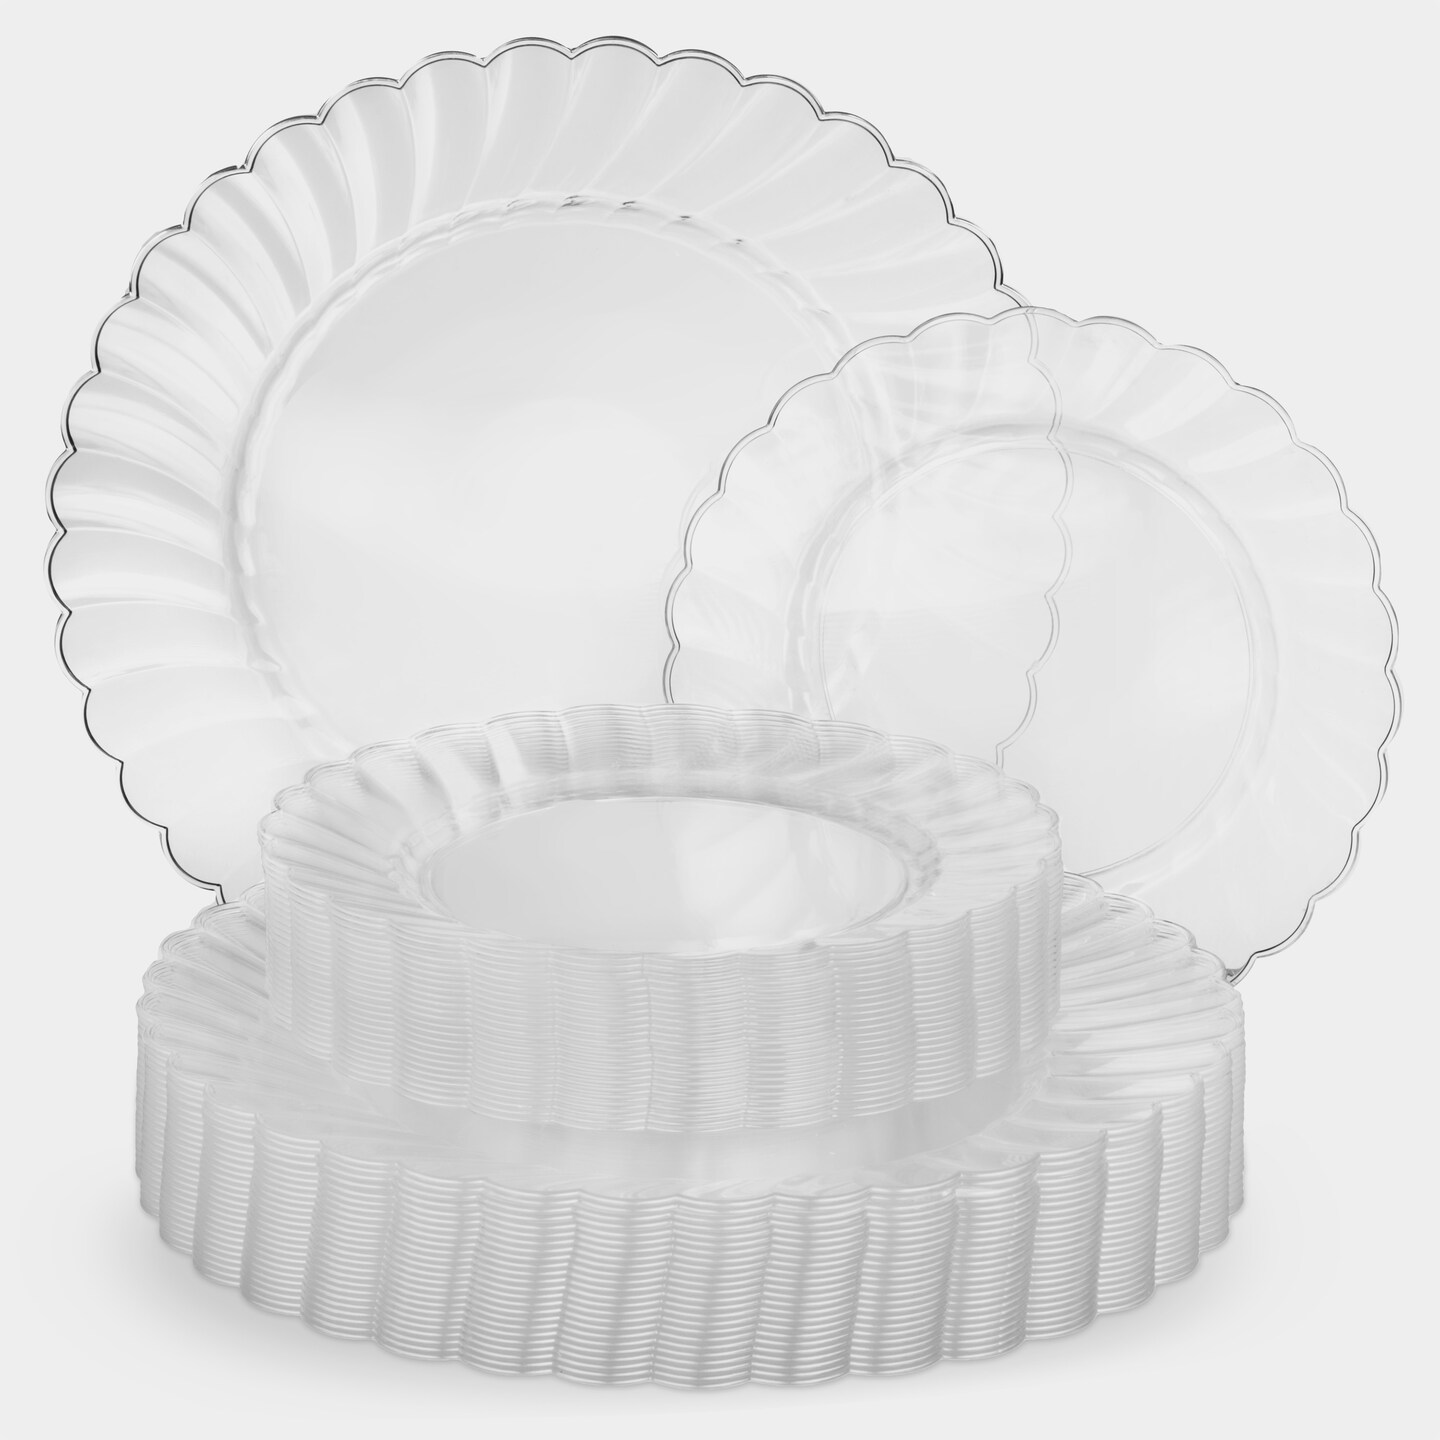 15 Small Strong Plastic TRAYS - - - - - clear party holder plate wedding  table